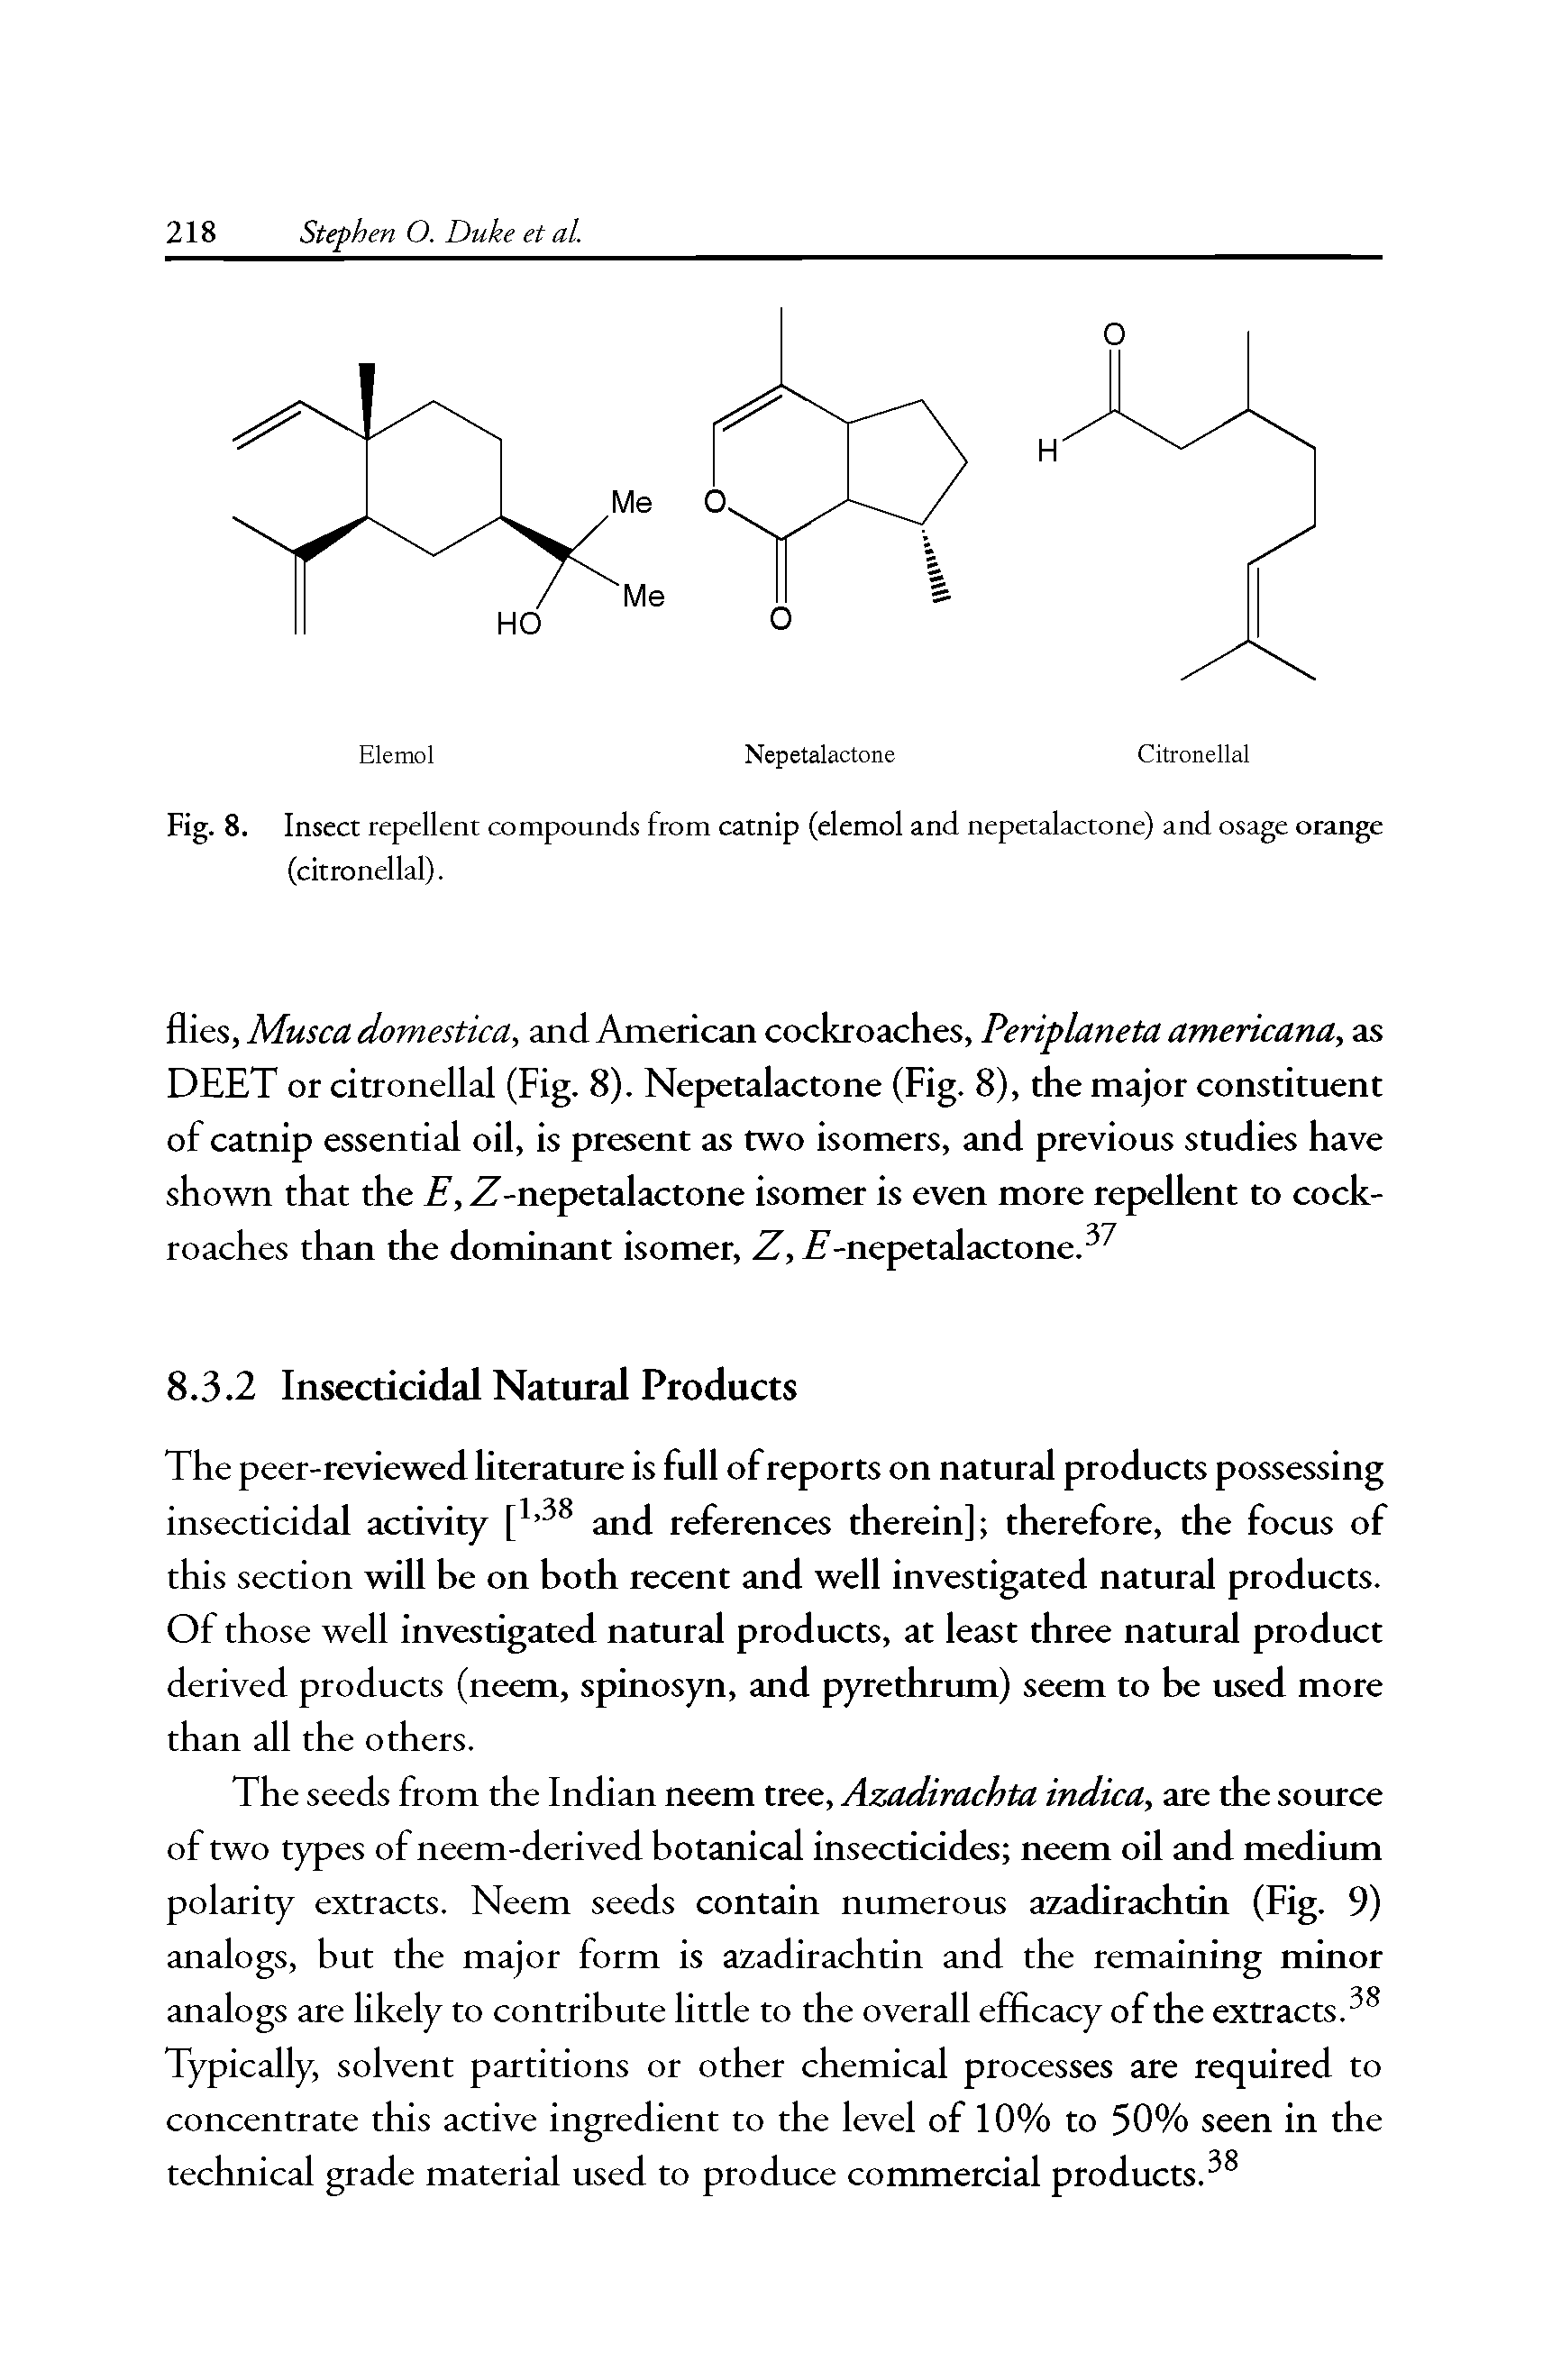 Fig. 8. Insect repellent compounds from catnip (elemol and nepetalactone) and osage orange (citronellal).